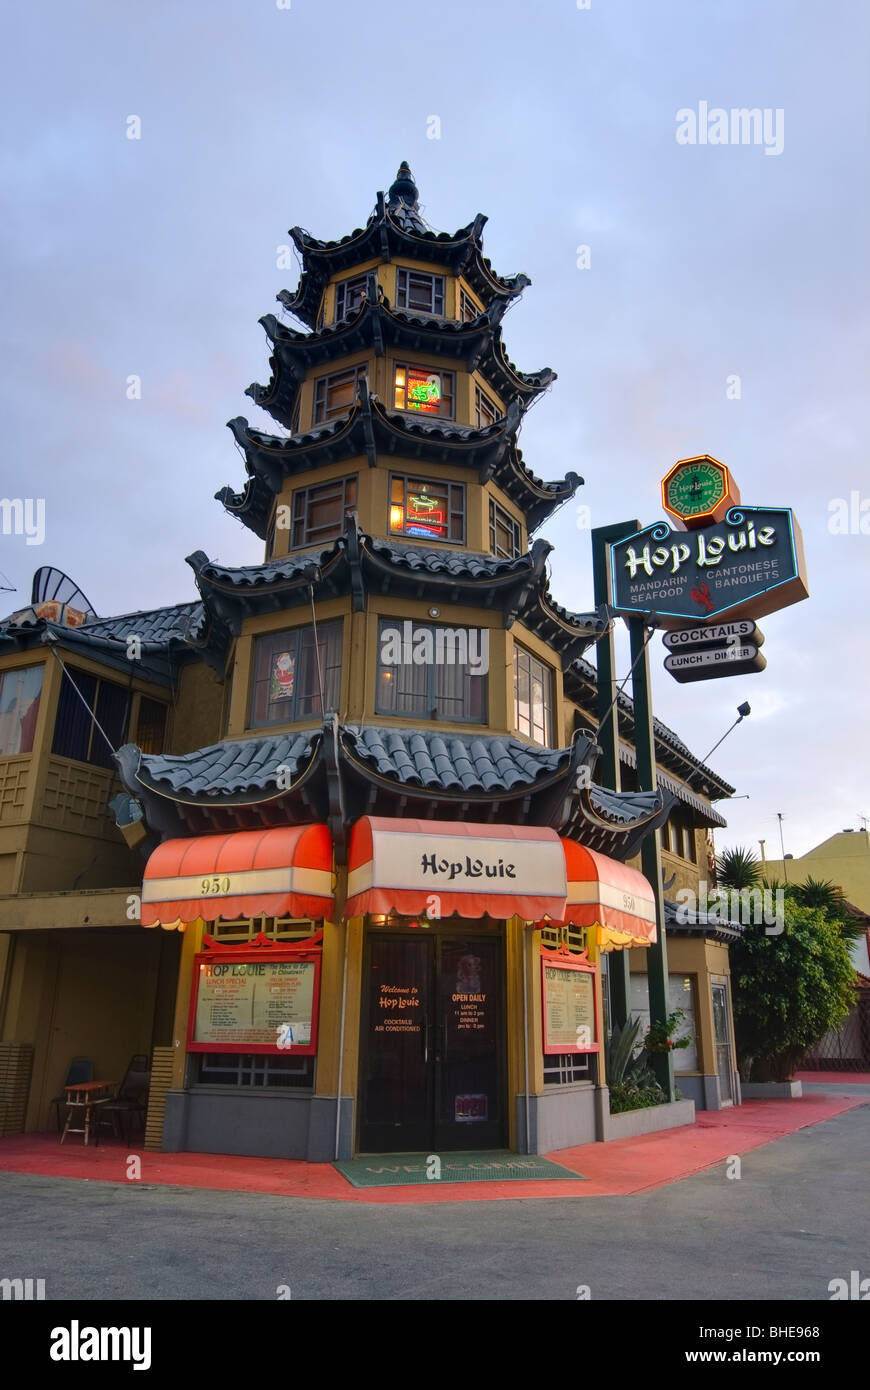 Hop Louie in Los Angeles Chinatown plaza. Stock Photo